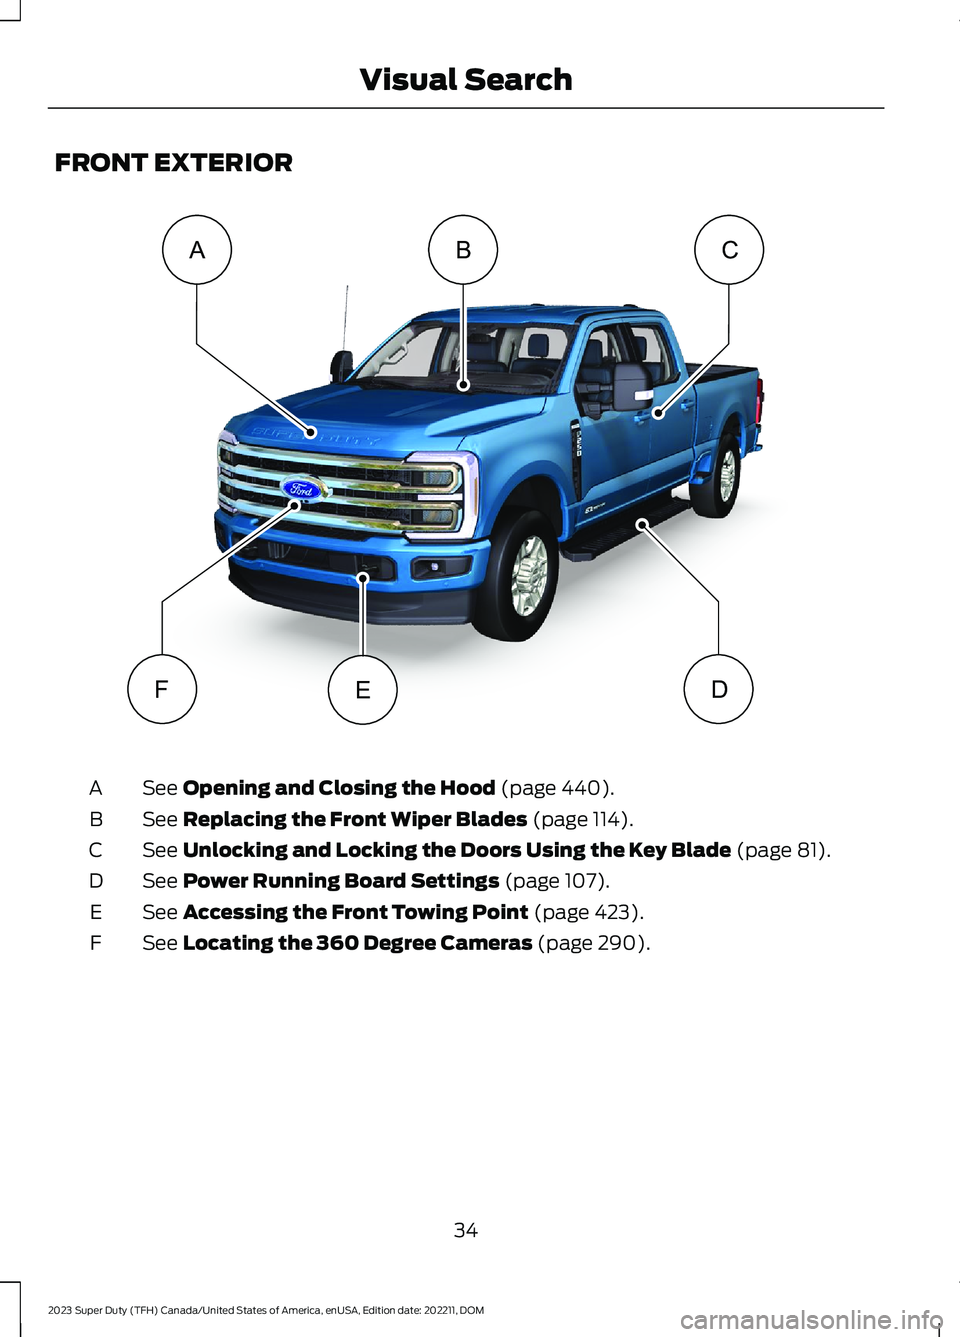 FORD SUPER DUTY 2023  Owners Manual FRONT EXTERIOR
See Opening and Closing the Hood (page 440).A
See Replacing the Front Wiper Blades (page 114).B
See Unlocking and Locking the Doors Using the Key Blade (page 81).C
See Power Running Boa